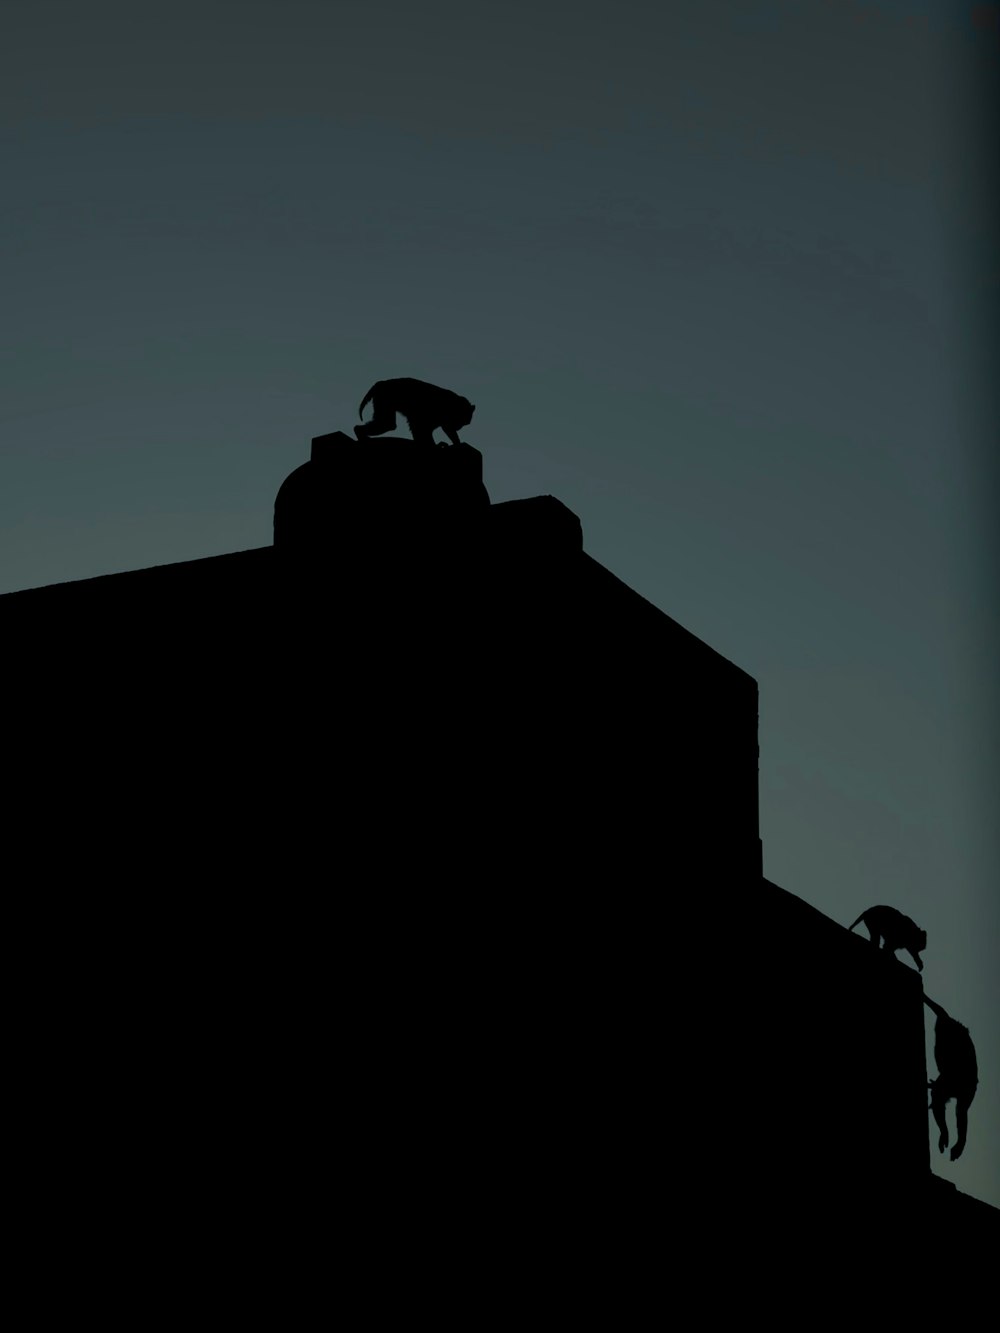 a silhouette of a building with a cat on top